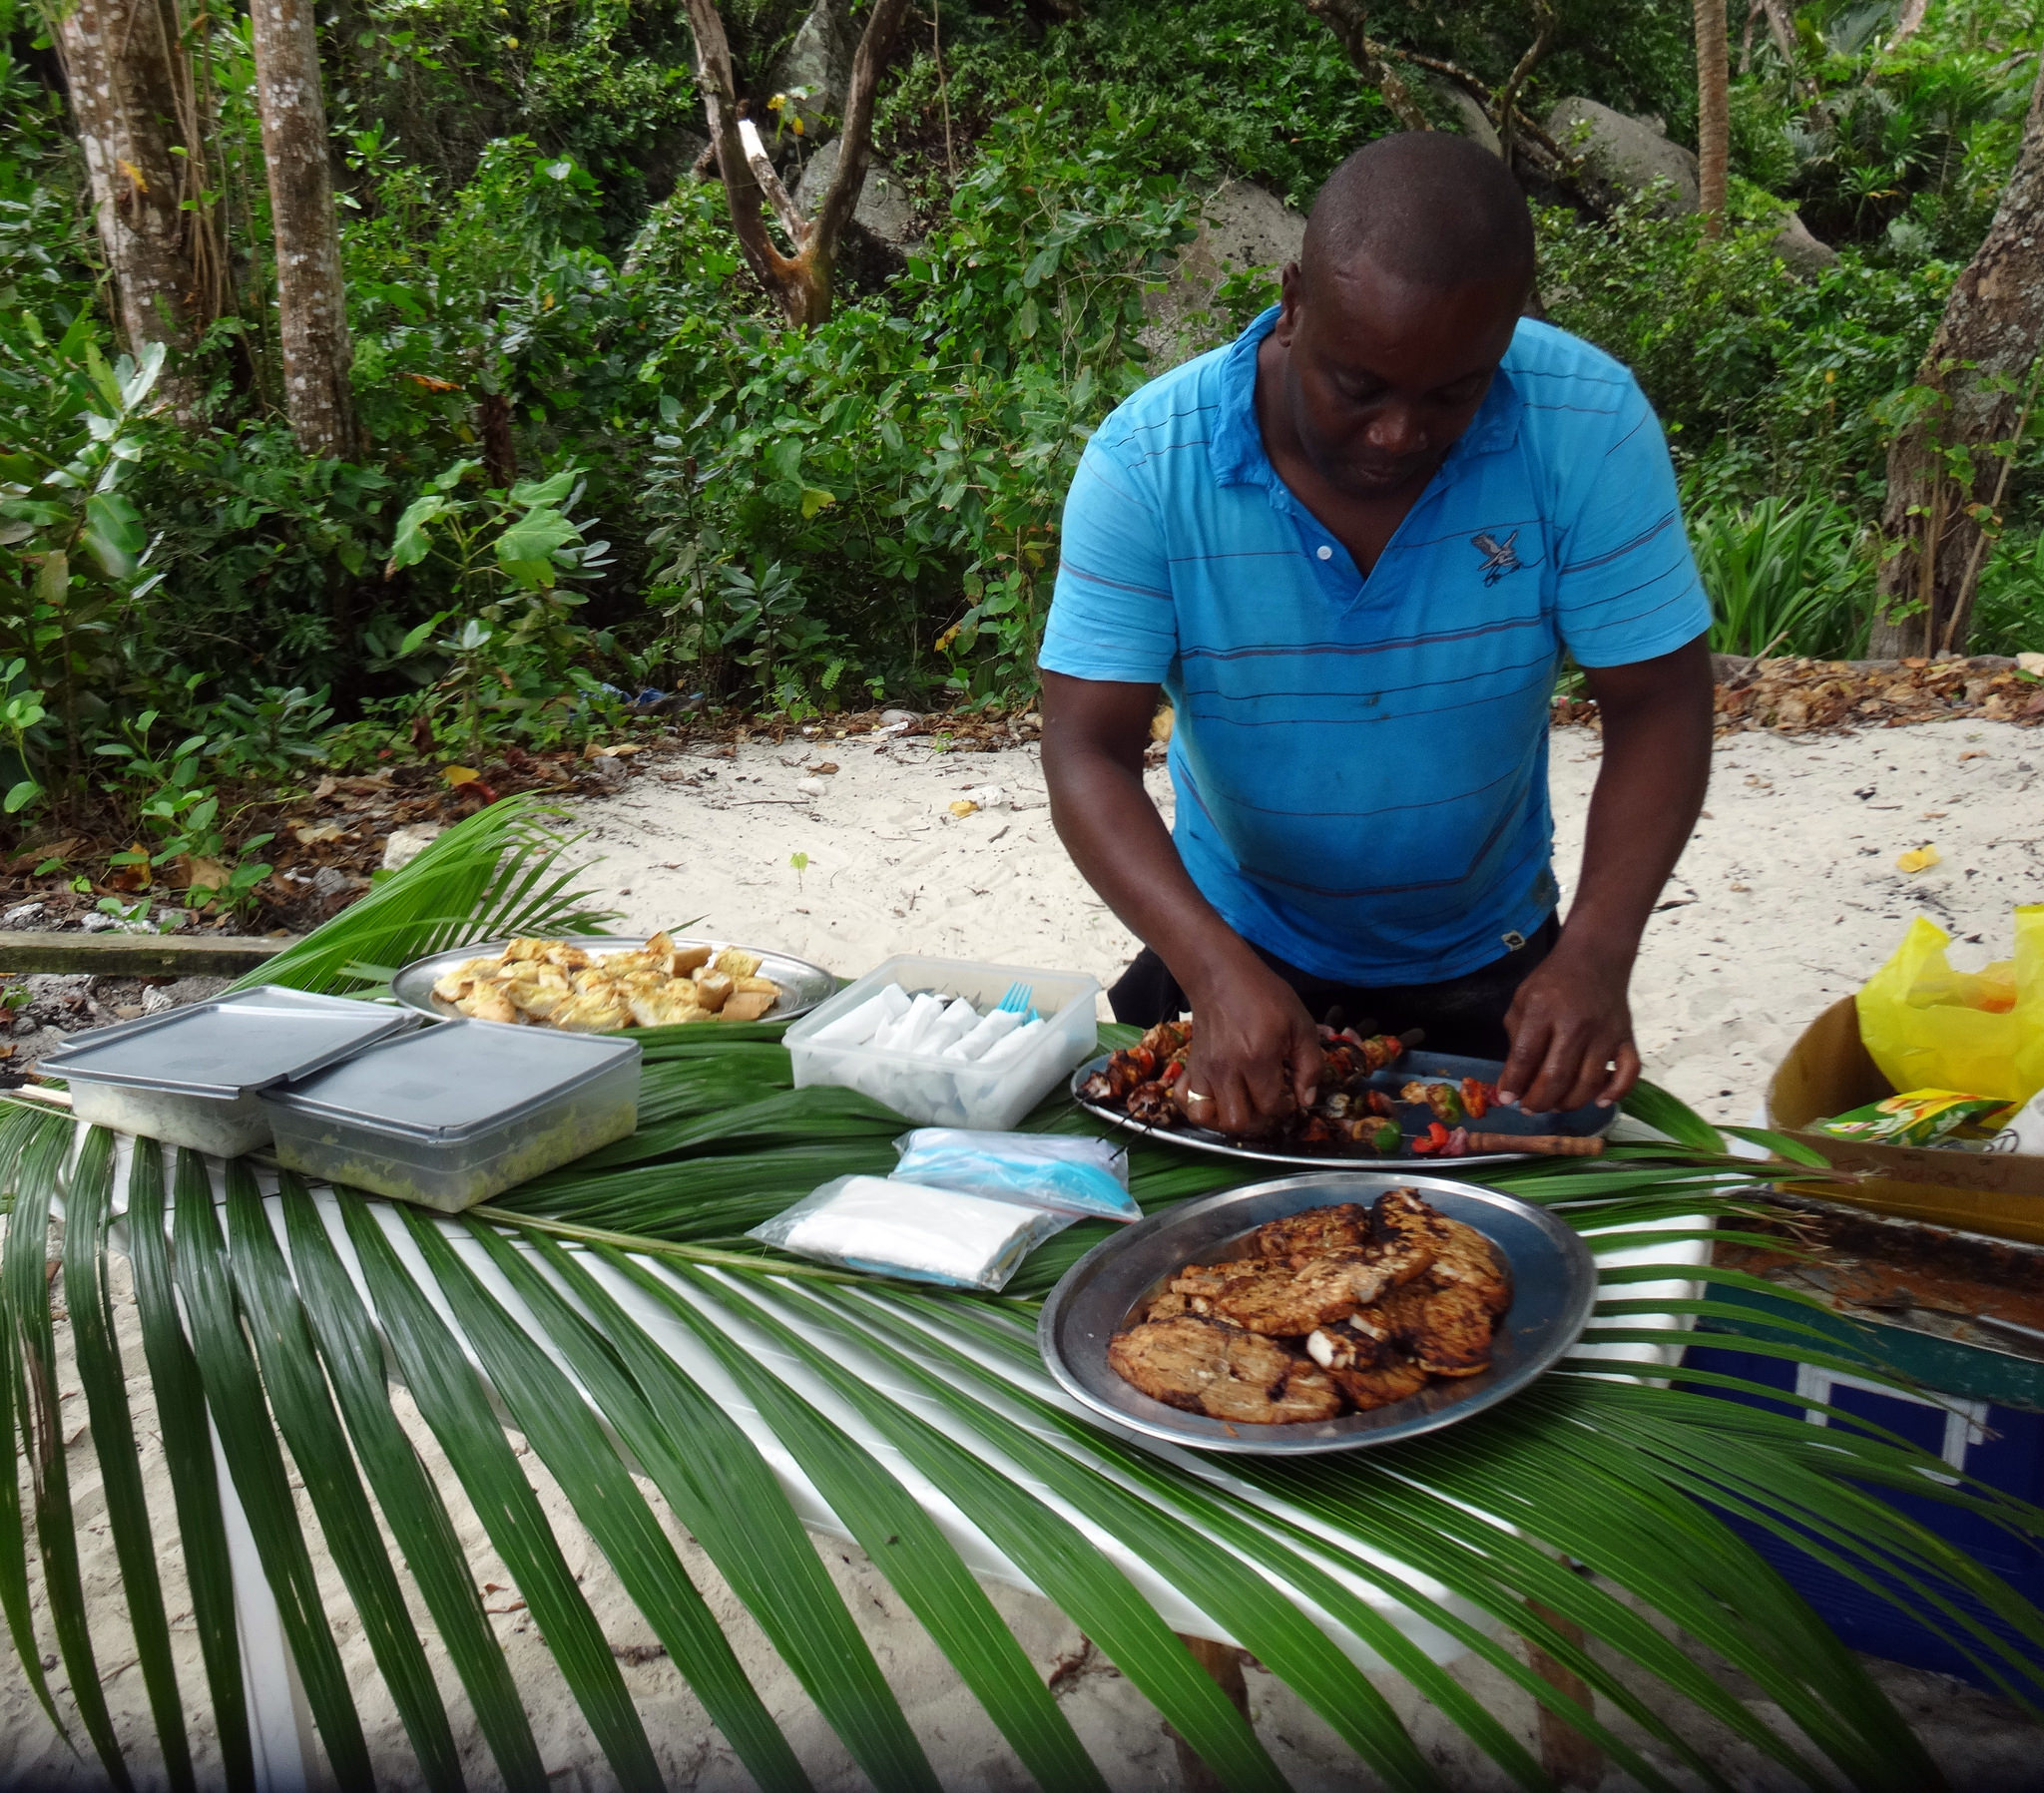 20 unmissable attractions in Seychelles - bbq on the beach at curieuse island